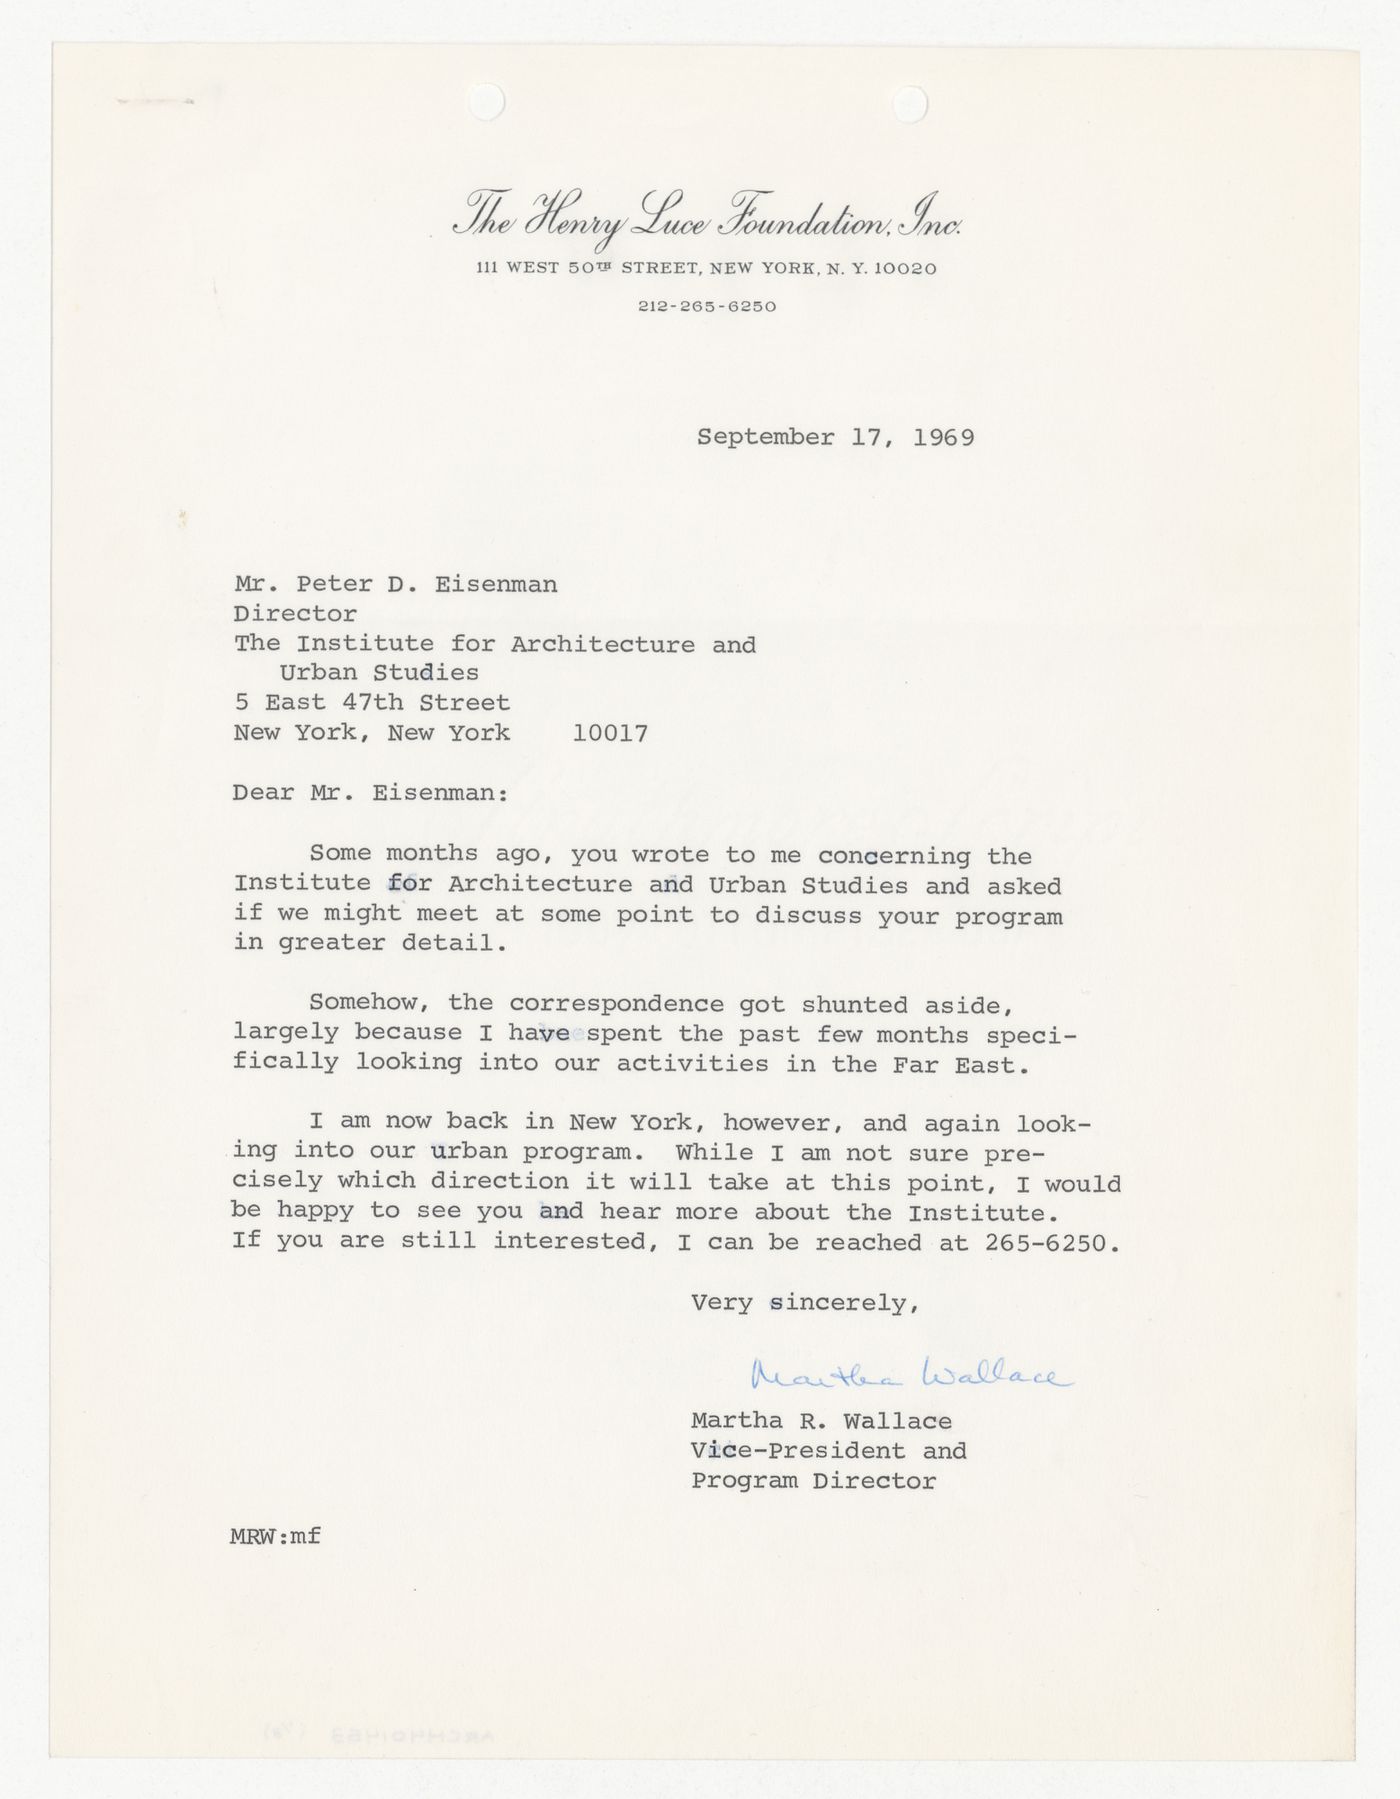 Letter from Martha R. Wallace to Peter D. Eisenman responding to donation request made by Eisenman with attached copy of original letter